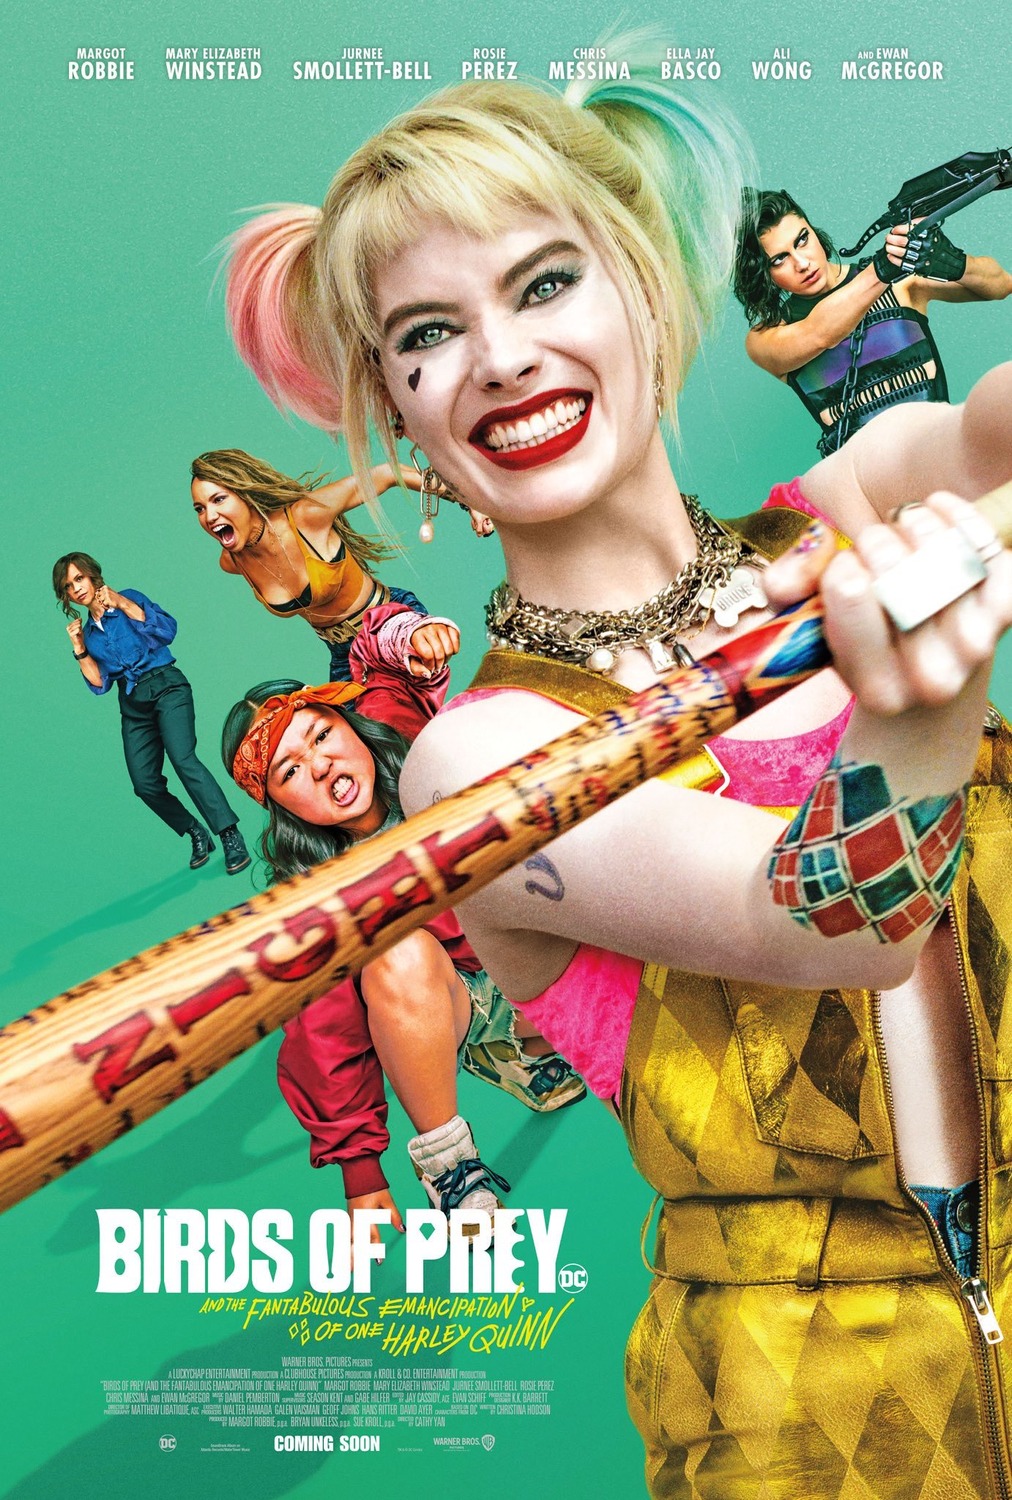 Extra Large Movie Poster Image for Birds of Prey (And the Fantabulous Emancipation of One Harley Quinn) (#16 of 18)